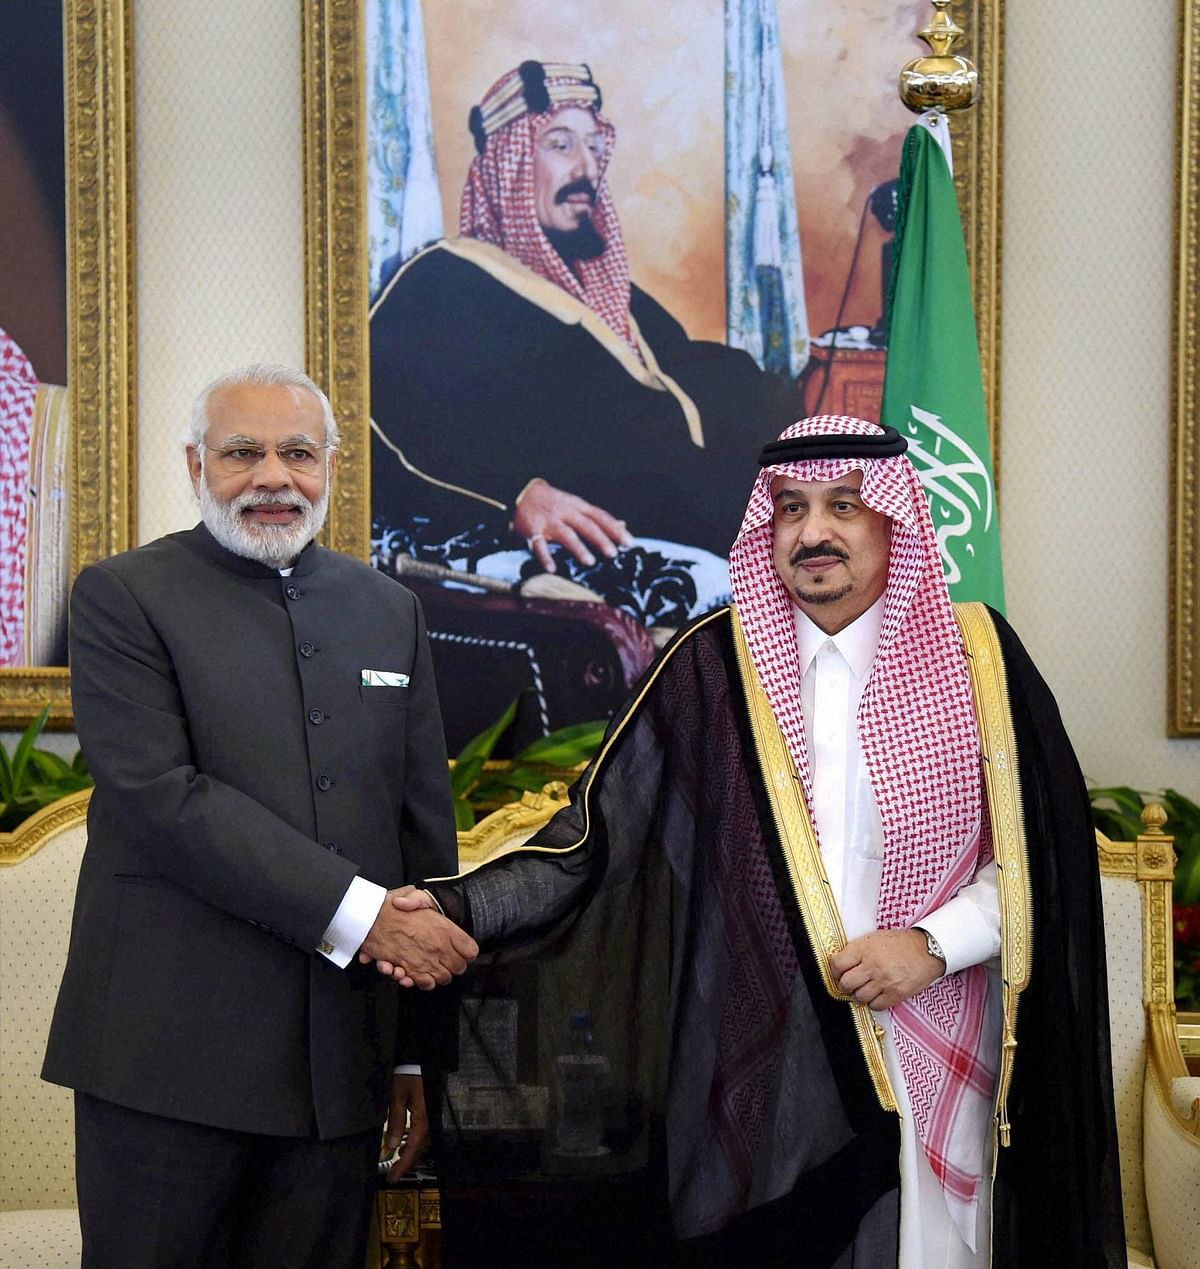 It is Modi’s second visit to the Gulf, a strategically important region which is home to over 8 million Indians.